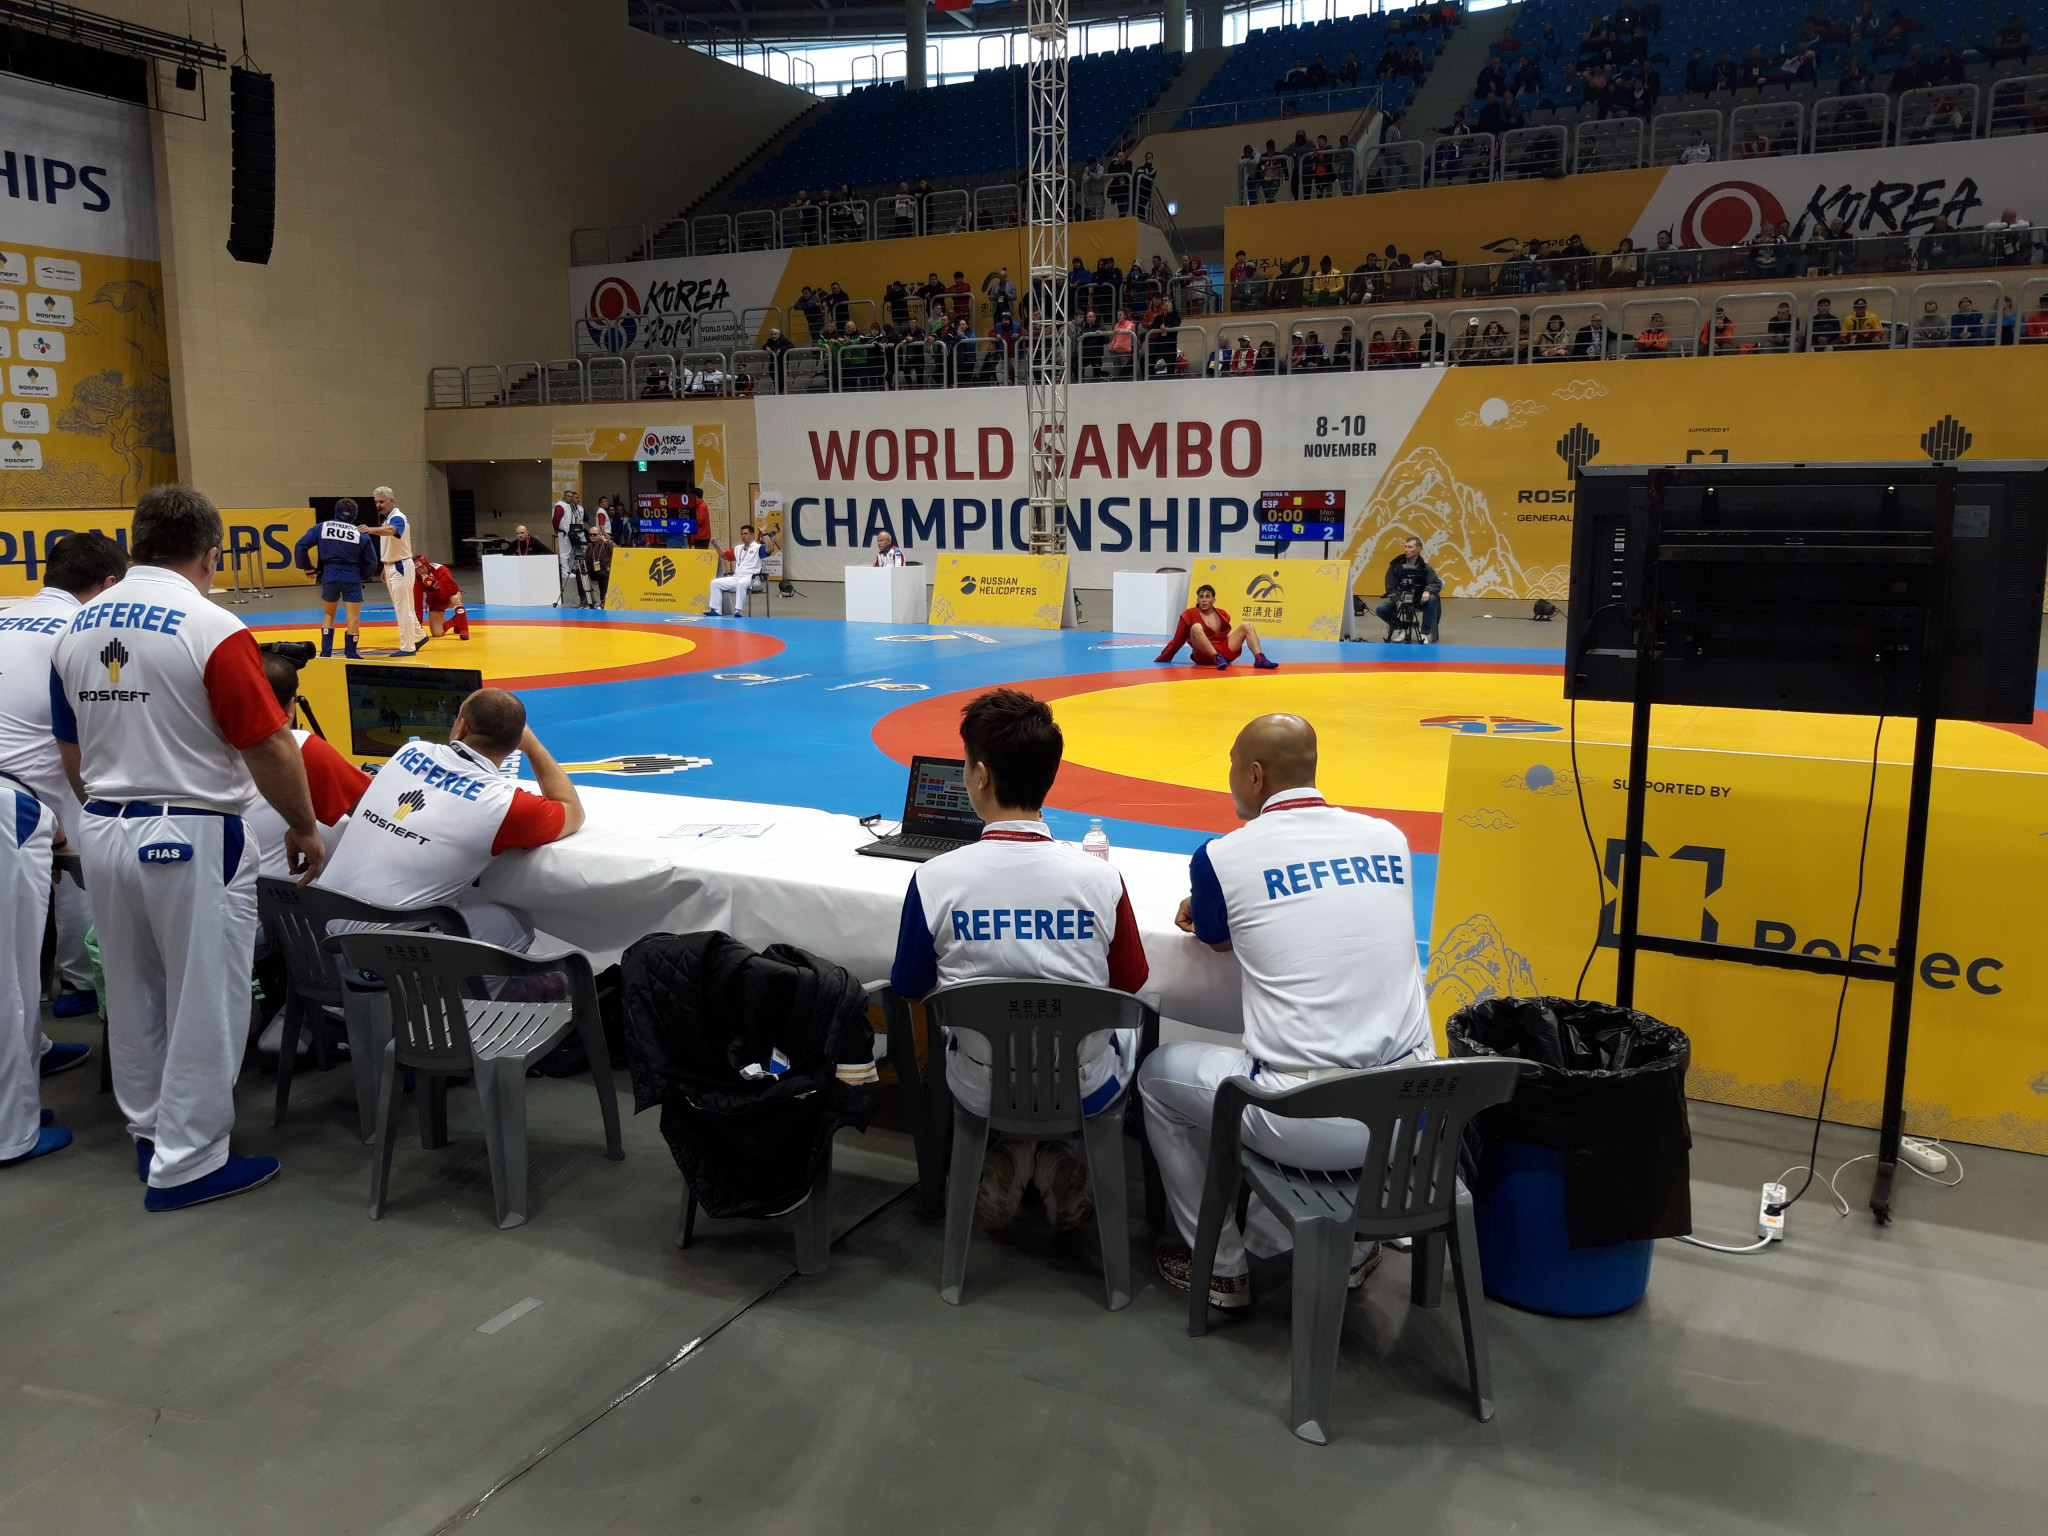 Men's 74kg top seed Nikolas Medina of Spain awaits a refeering call in his first round clash ©ITG 